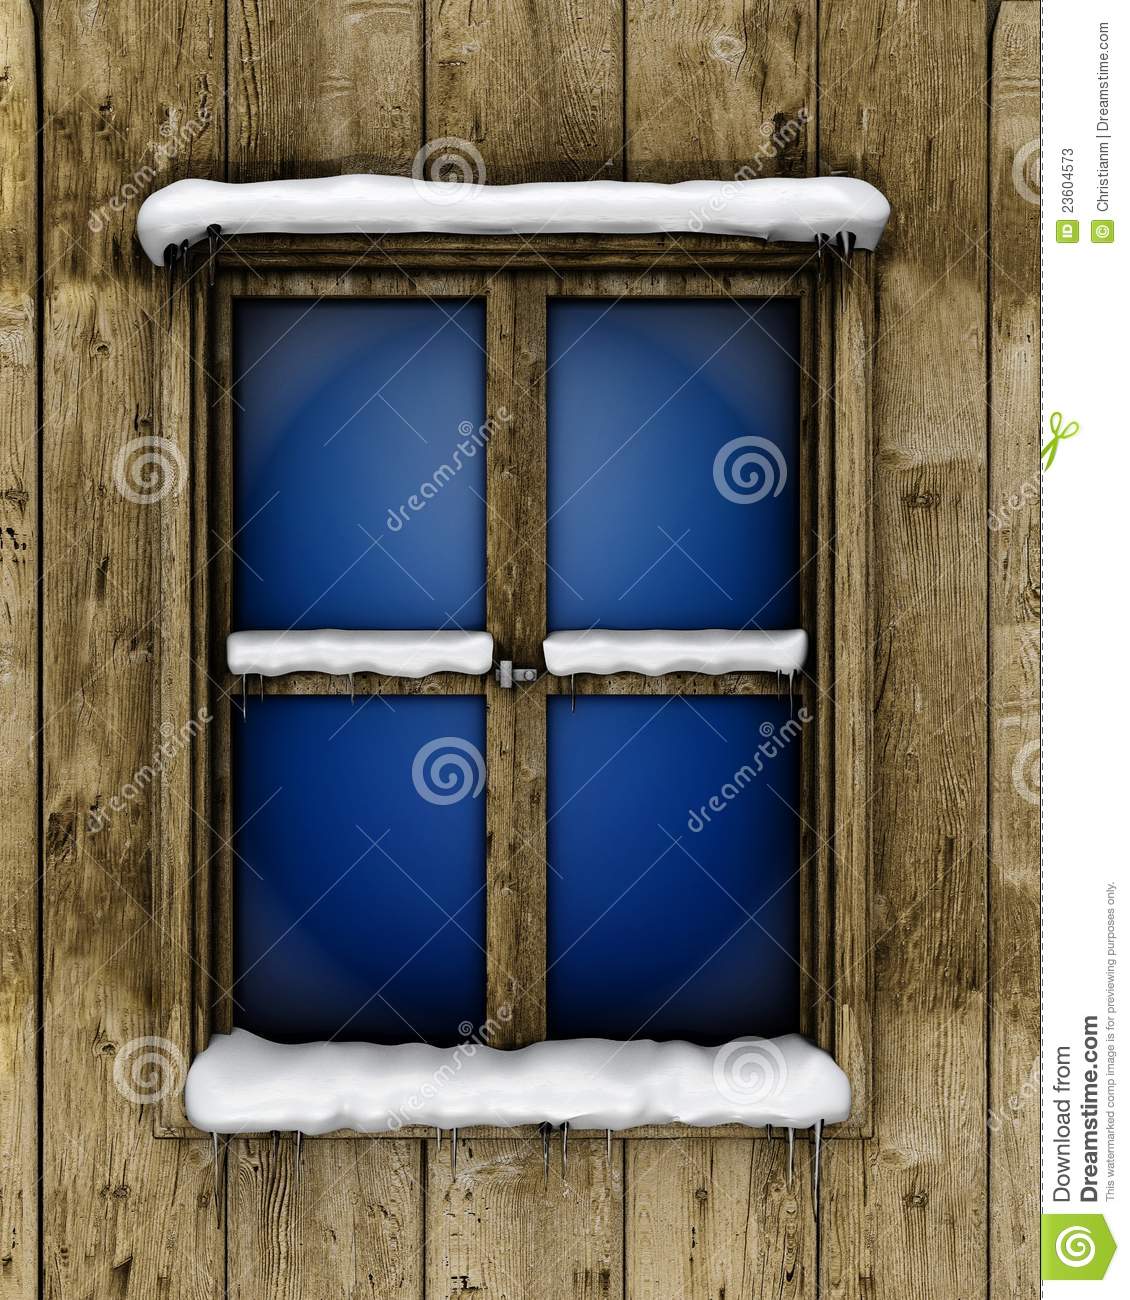 Illustration Of A Window Covered With Snow And Icicle During The